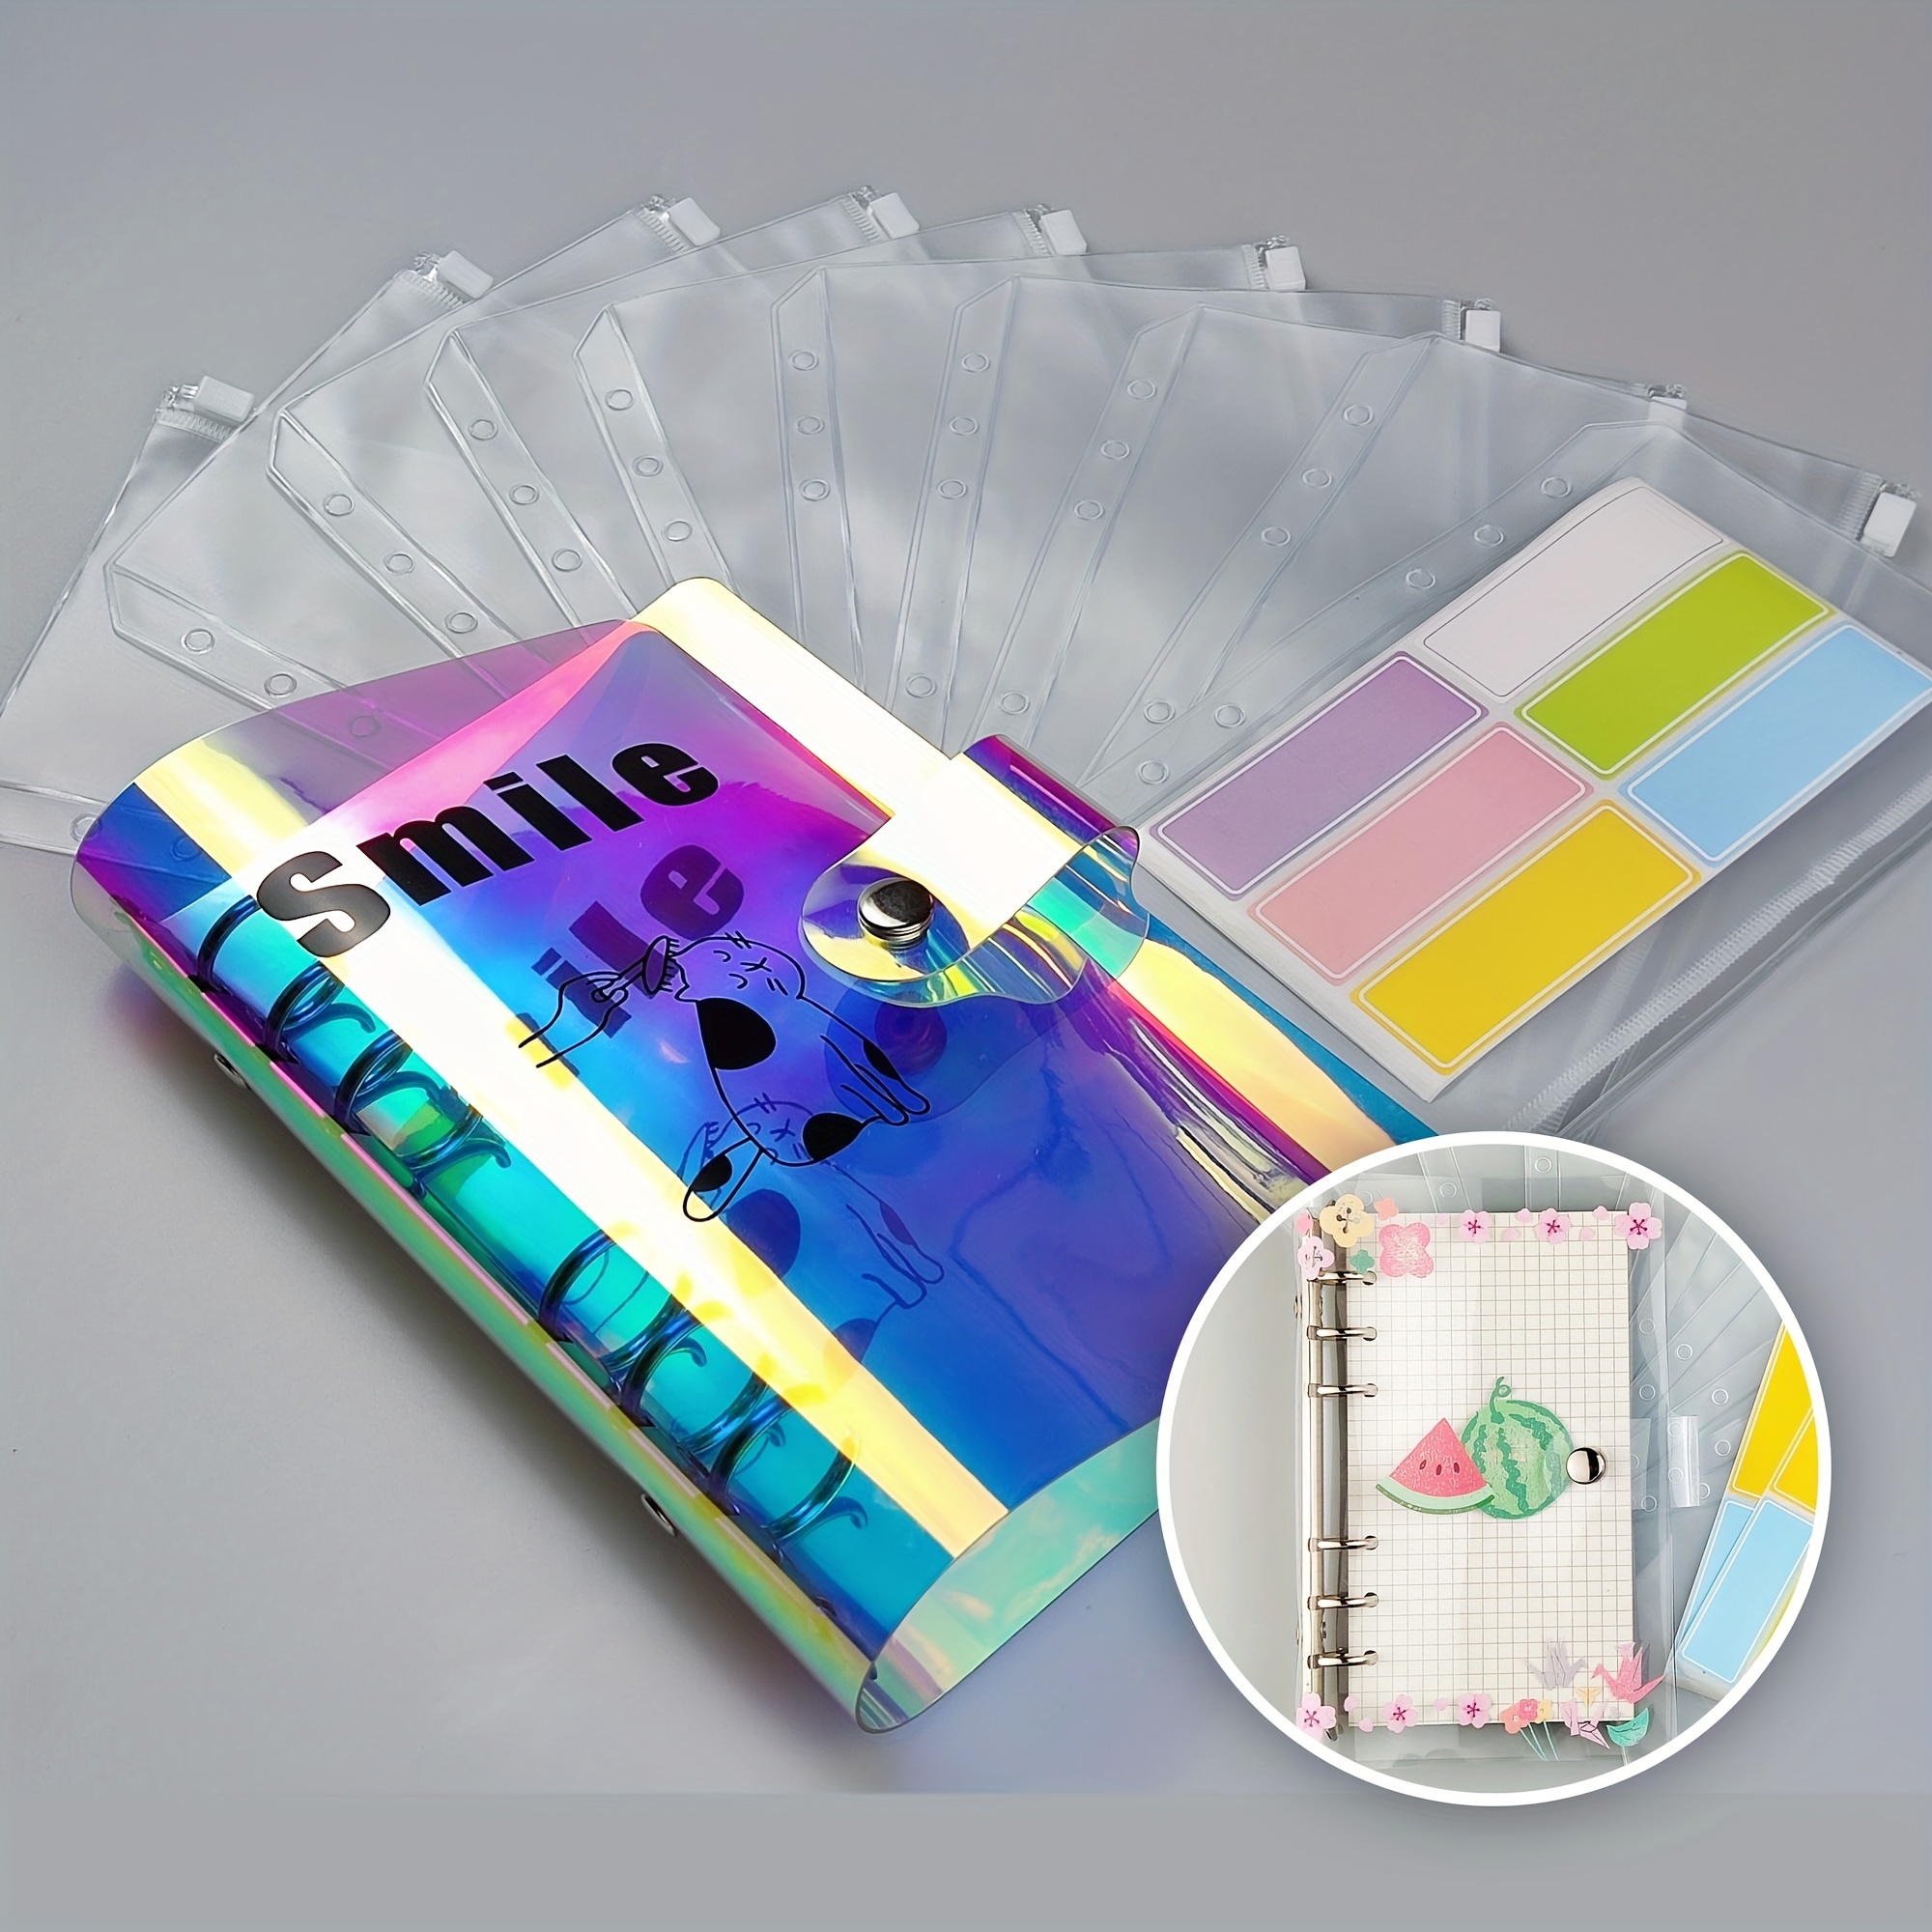 QZArt Reusable A5 Sticker Book with Translucent Binder - Double-Sided  Sticker Paper Organizer and Storage for Sticker Collecting, Featuring